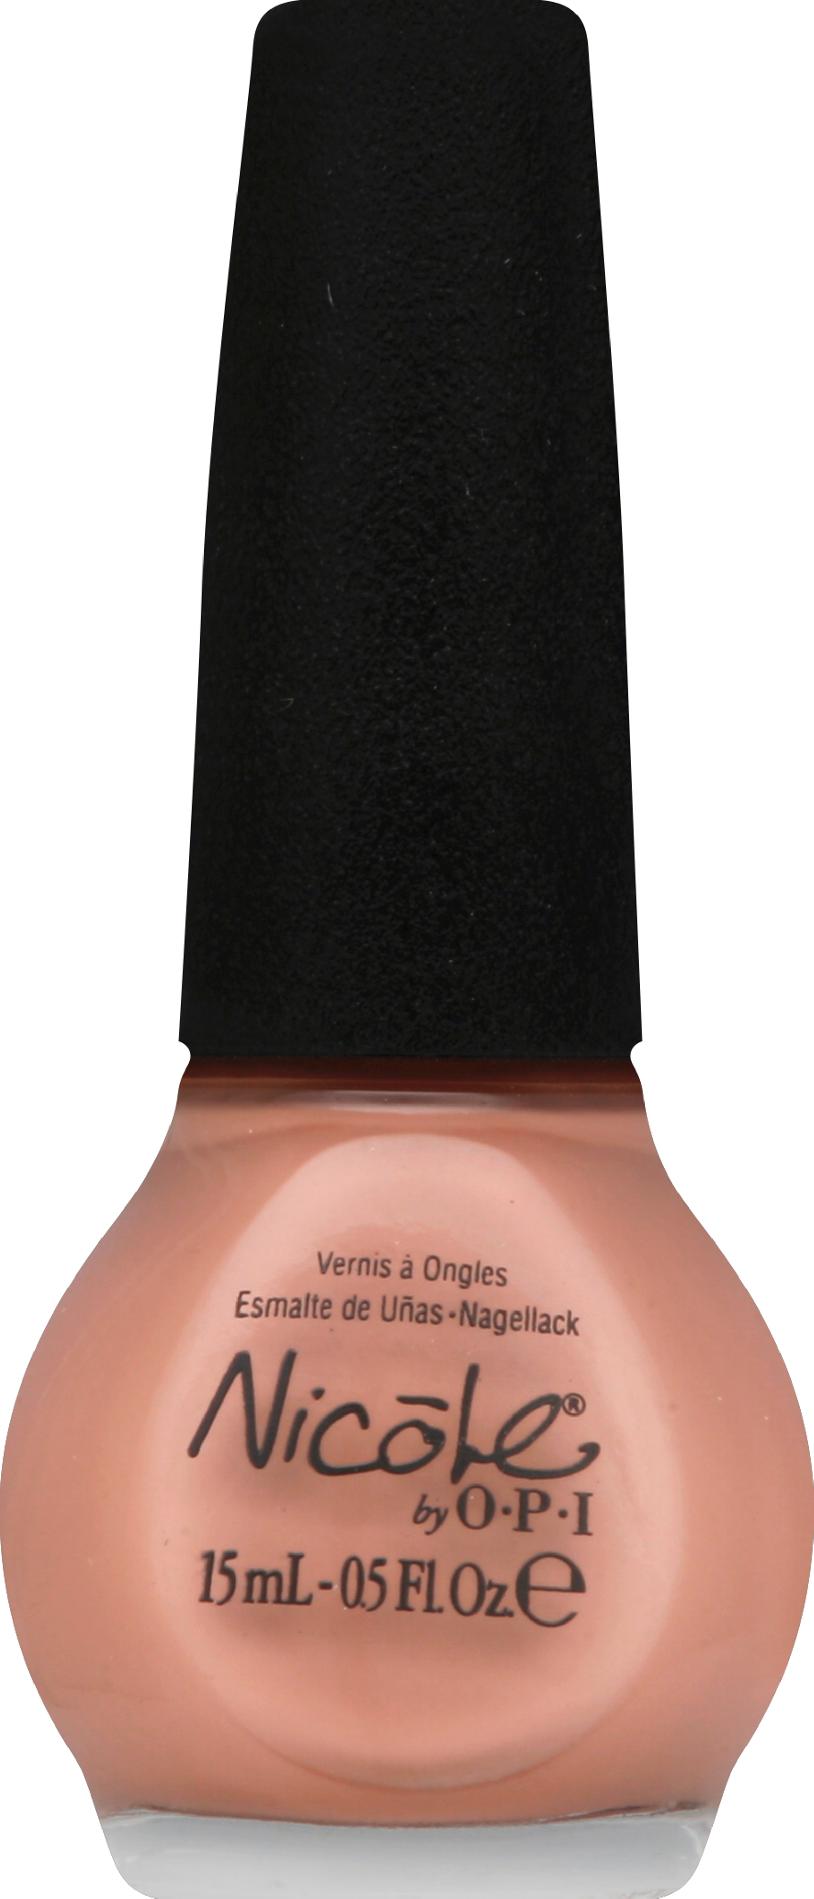 Carrie Underwood, Nail Lacquers, Southern Charm, 0.5 fl oz.